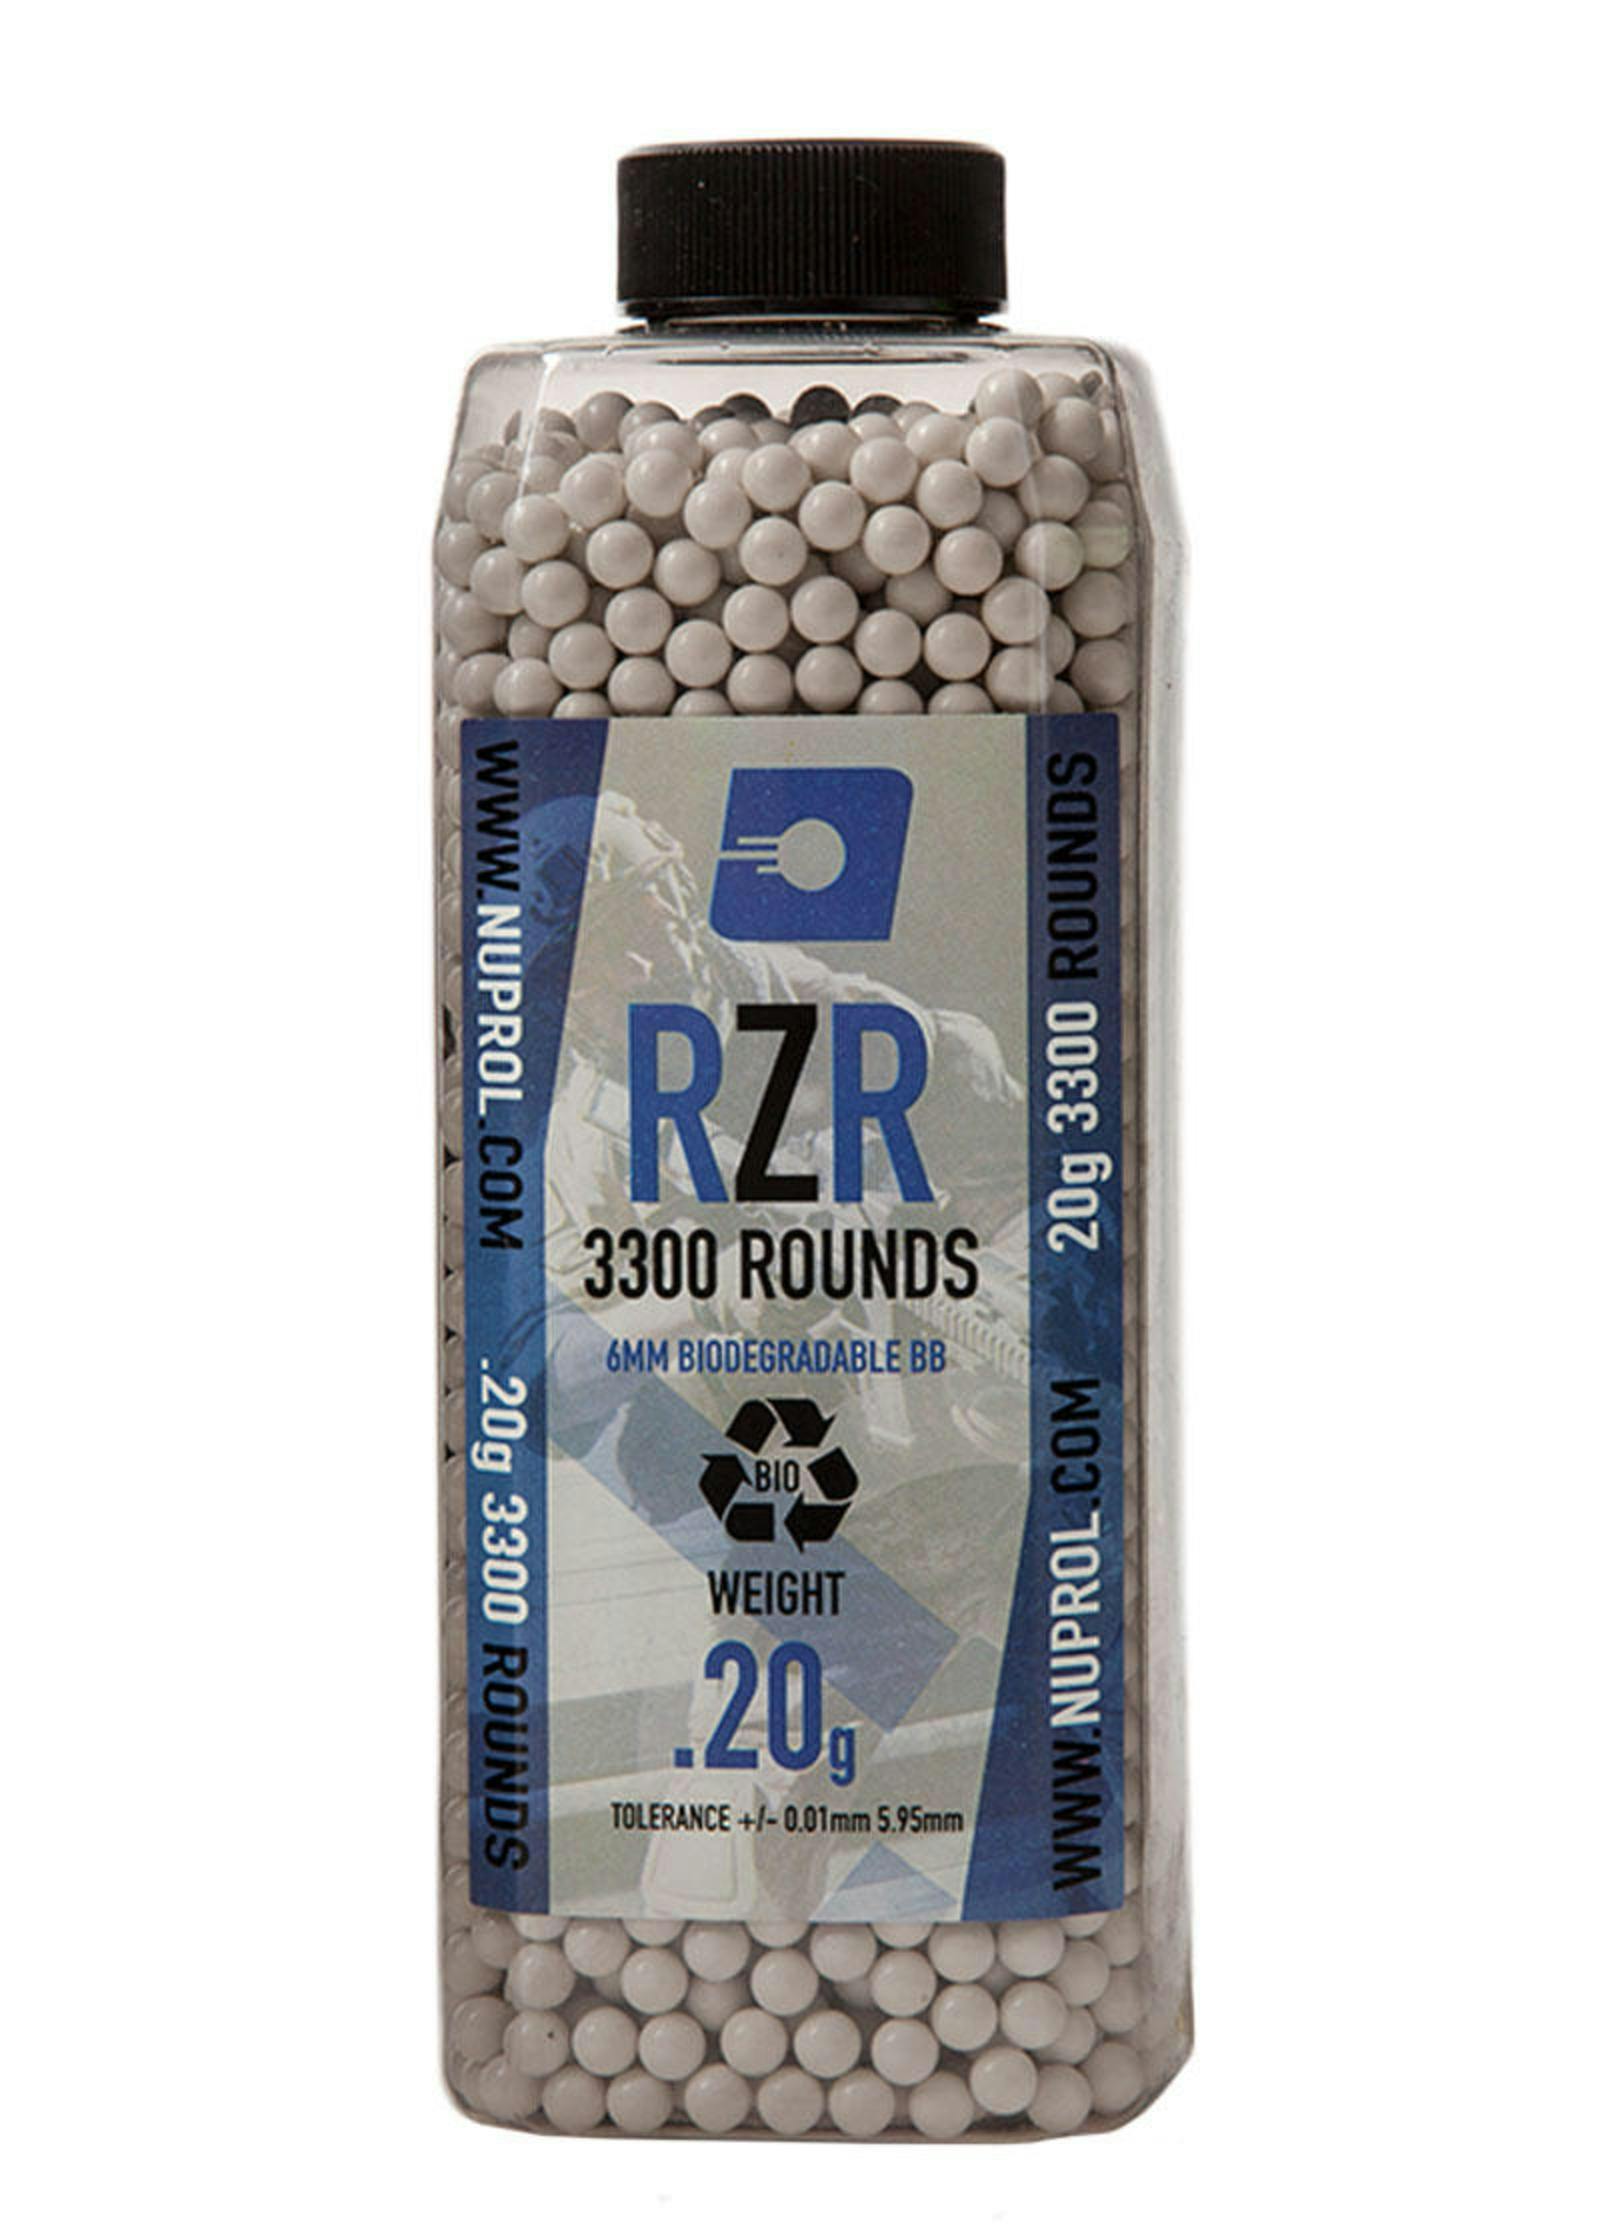 Nuprol RZR 0.20g Precision BBs 3300 Rounds Airsoft Pellets 